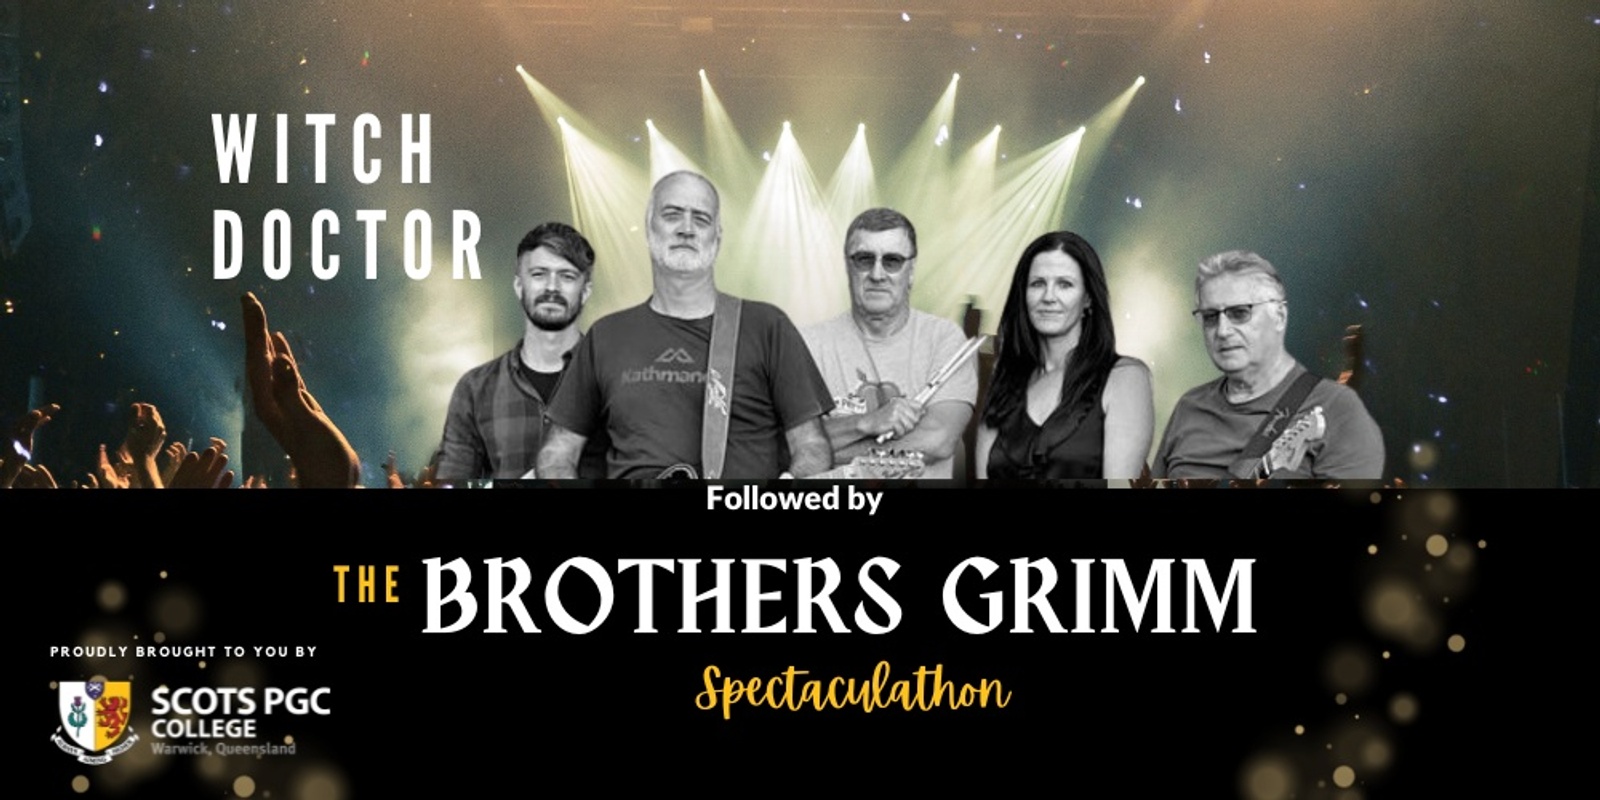 Banner image for Rock Around the Clock & The Brothers Grimm Spectaculathon - Friday Night